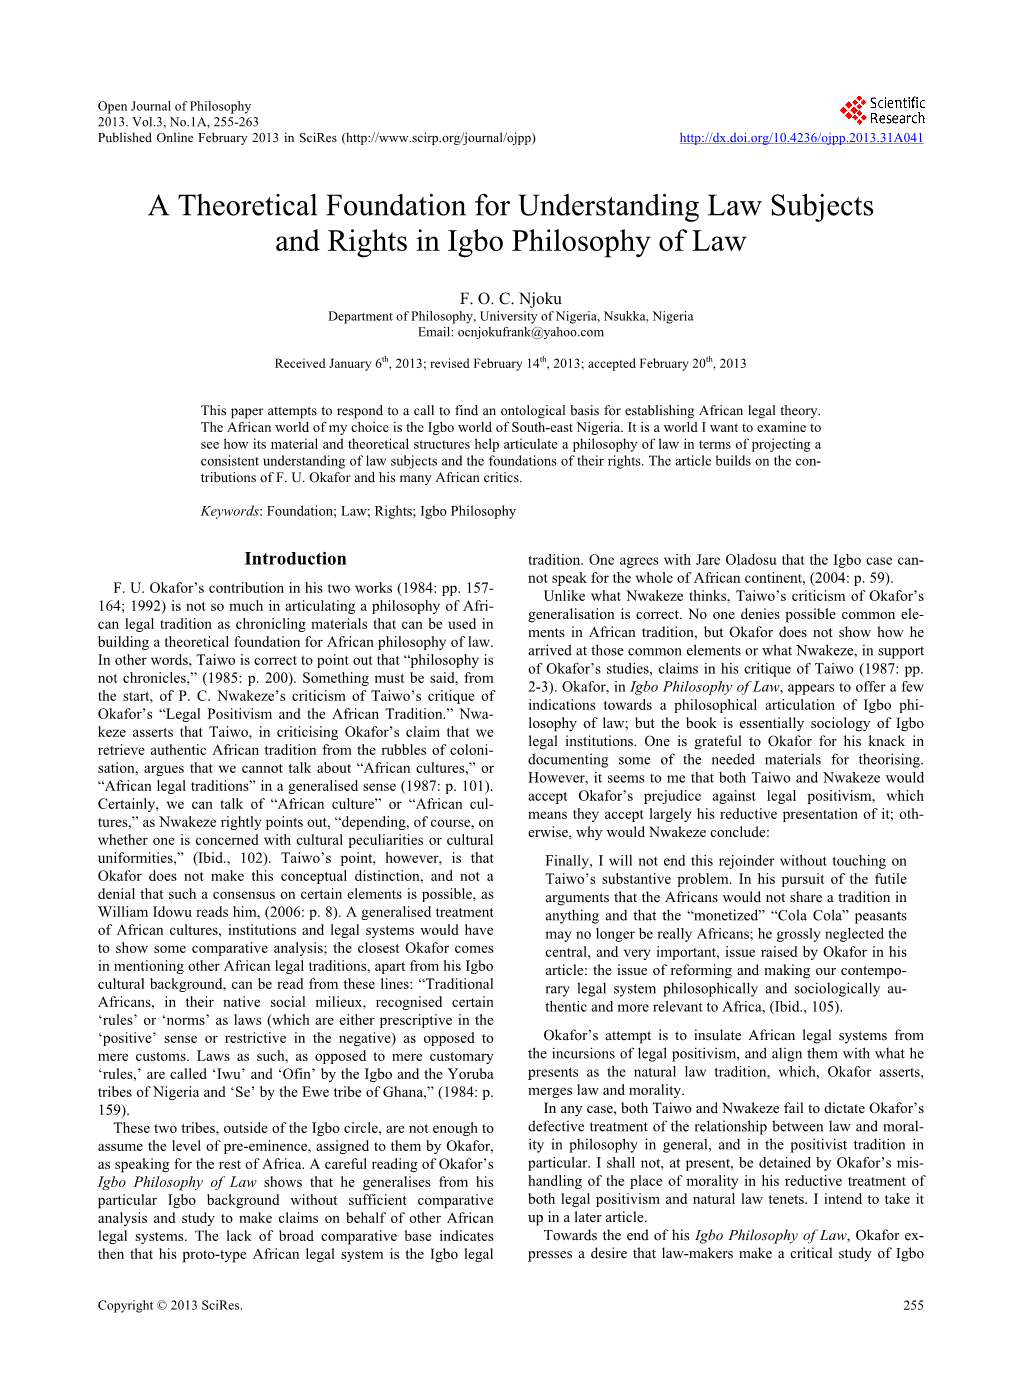 A Theoretical Foundation for Understanding Law Subjects and Rights in Igbo Philosophy of Law